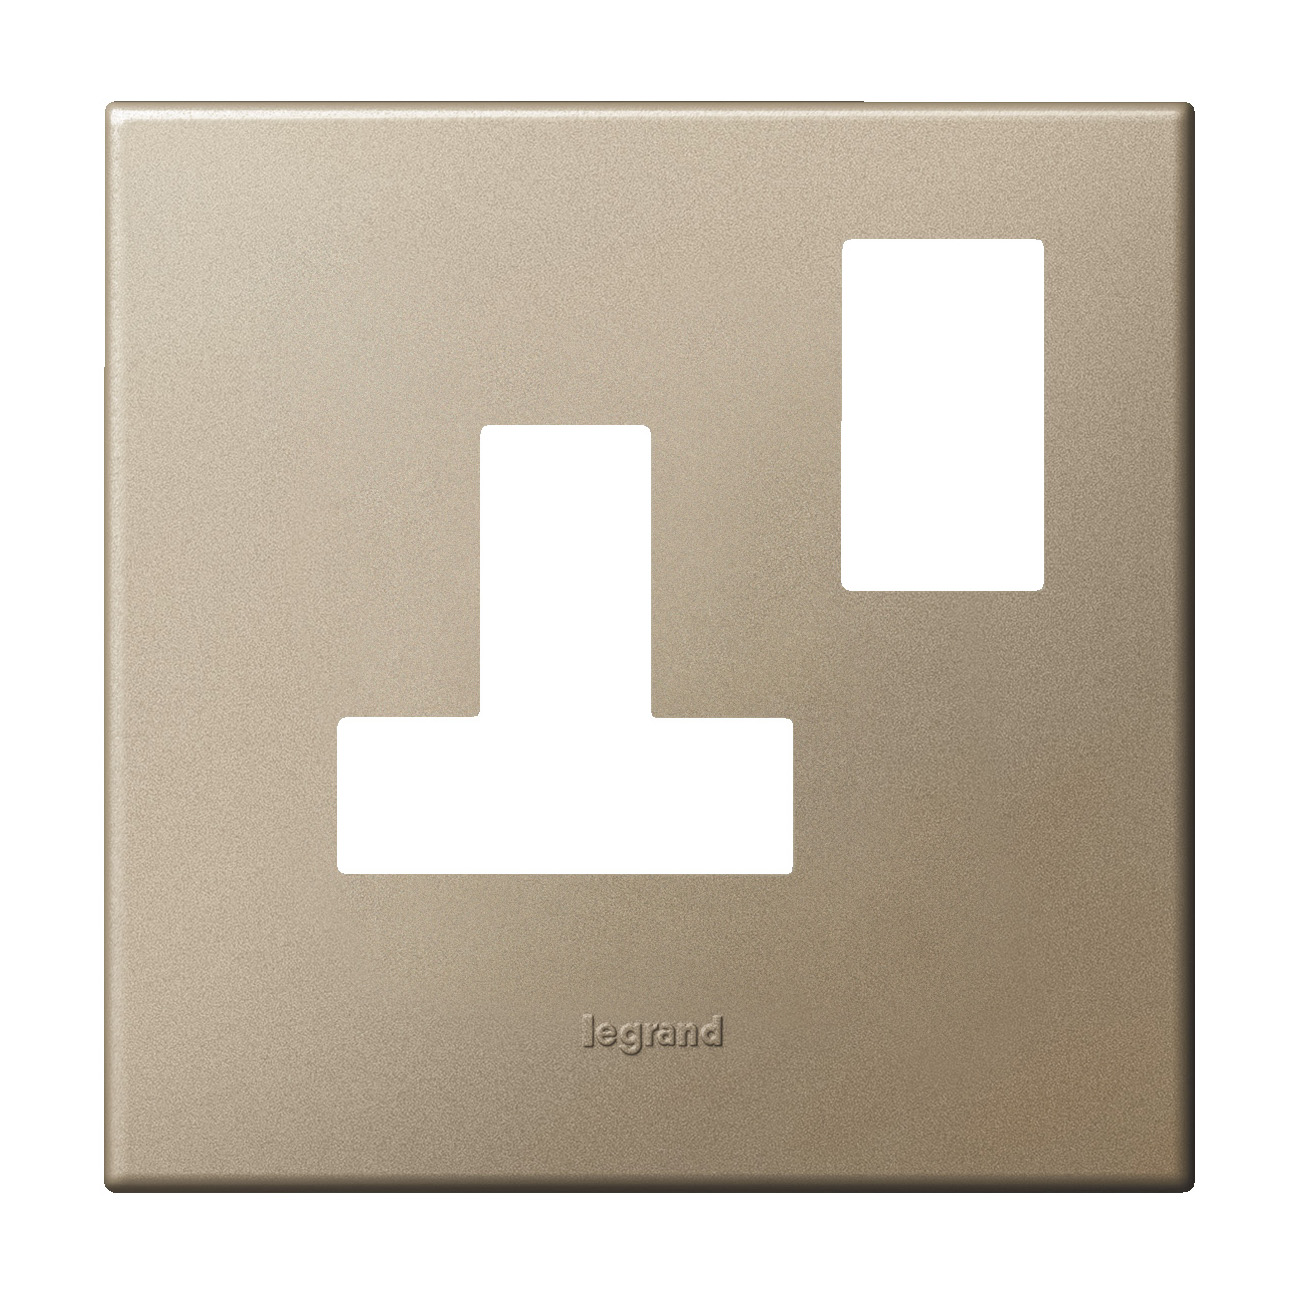 Arteor Surround Plate for 1 Gang 5A/13A Switched Socket Outlet Champagne, 571327, 3414971242517